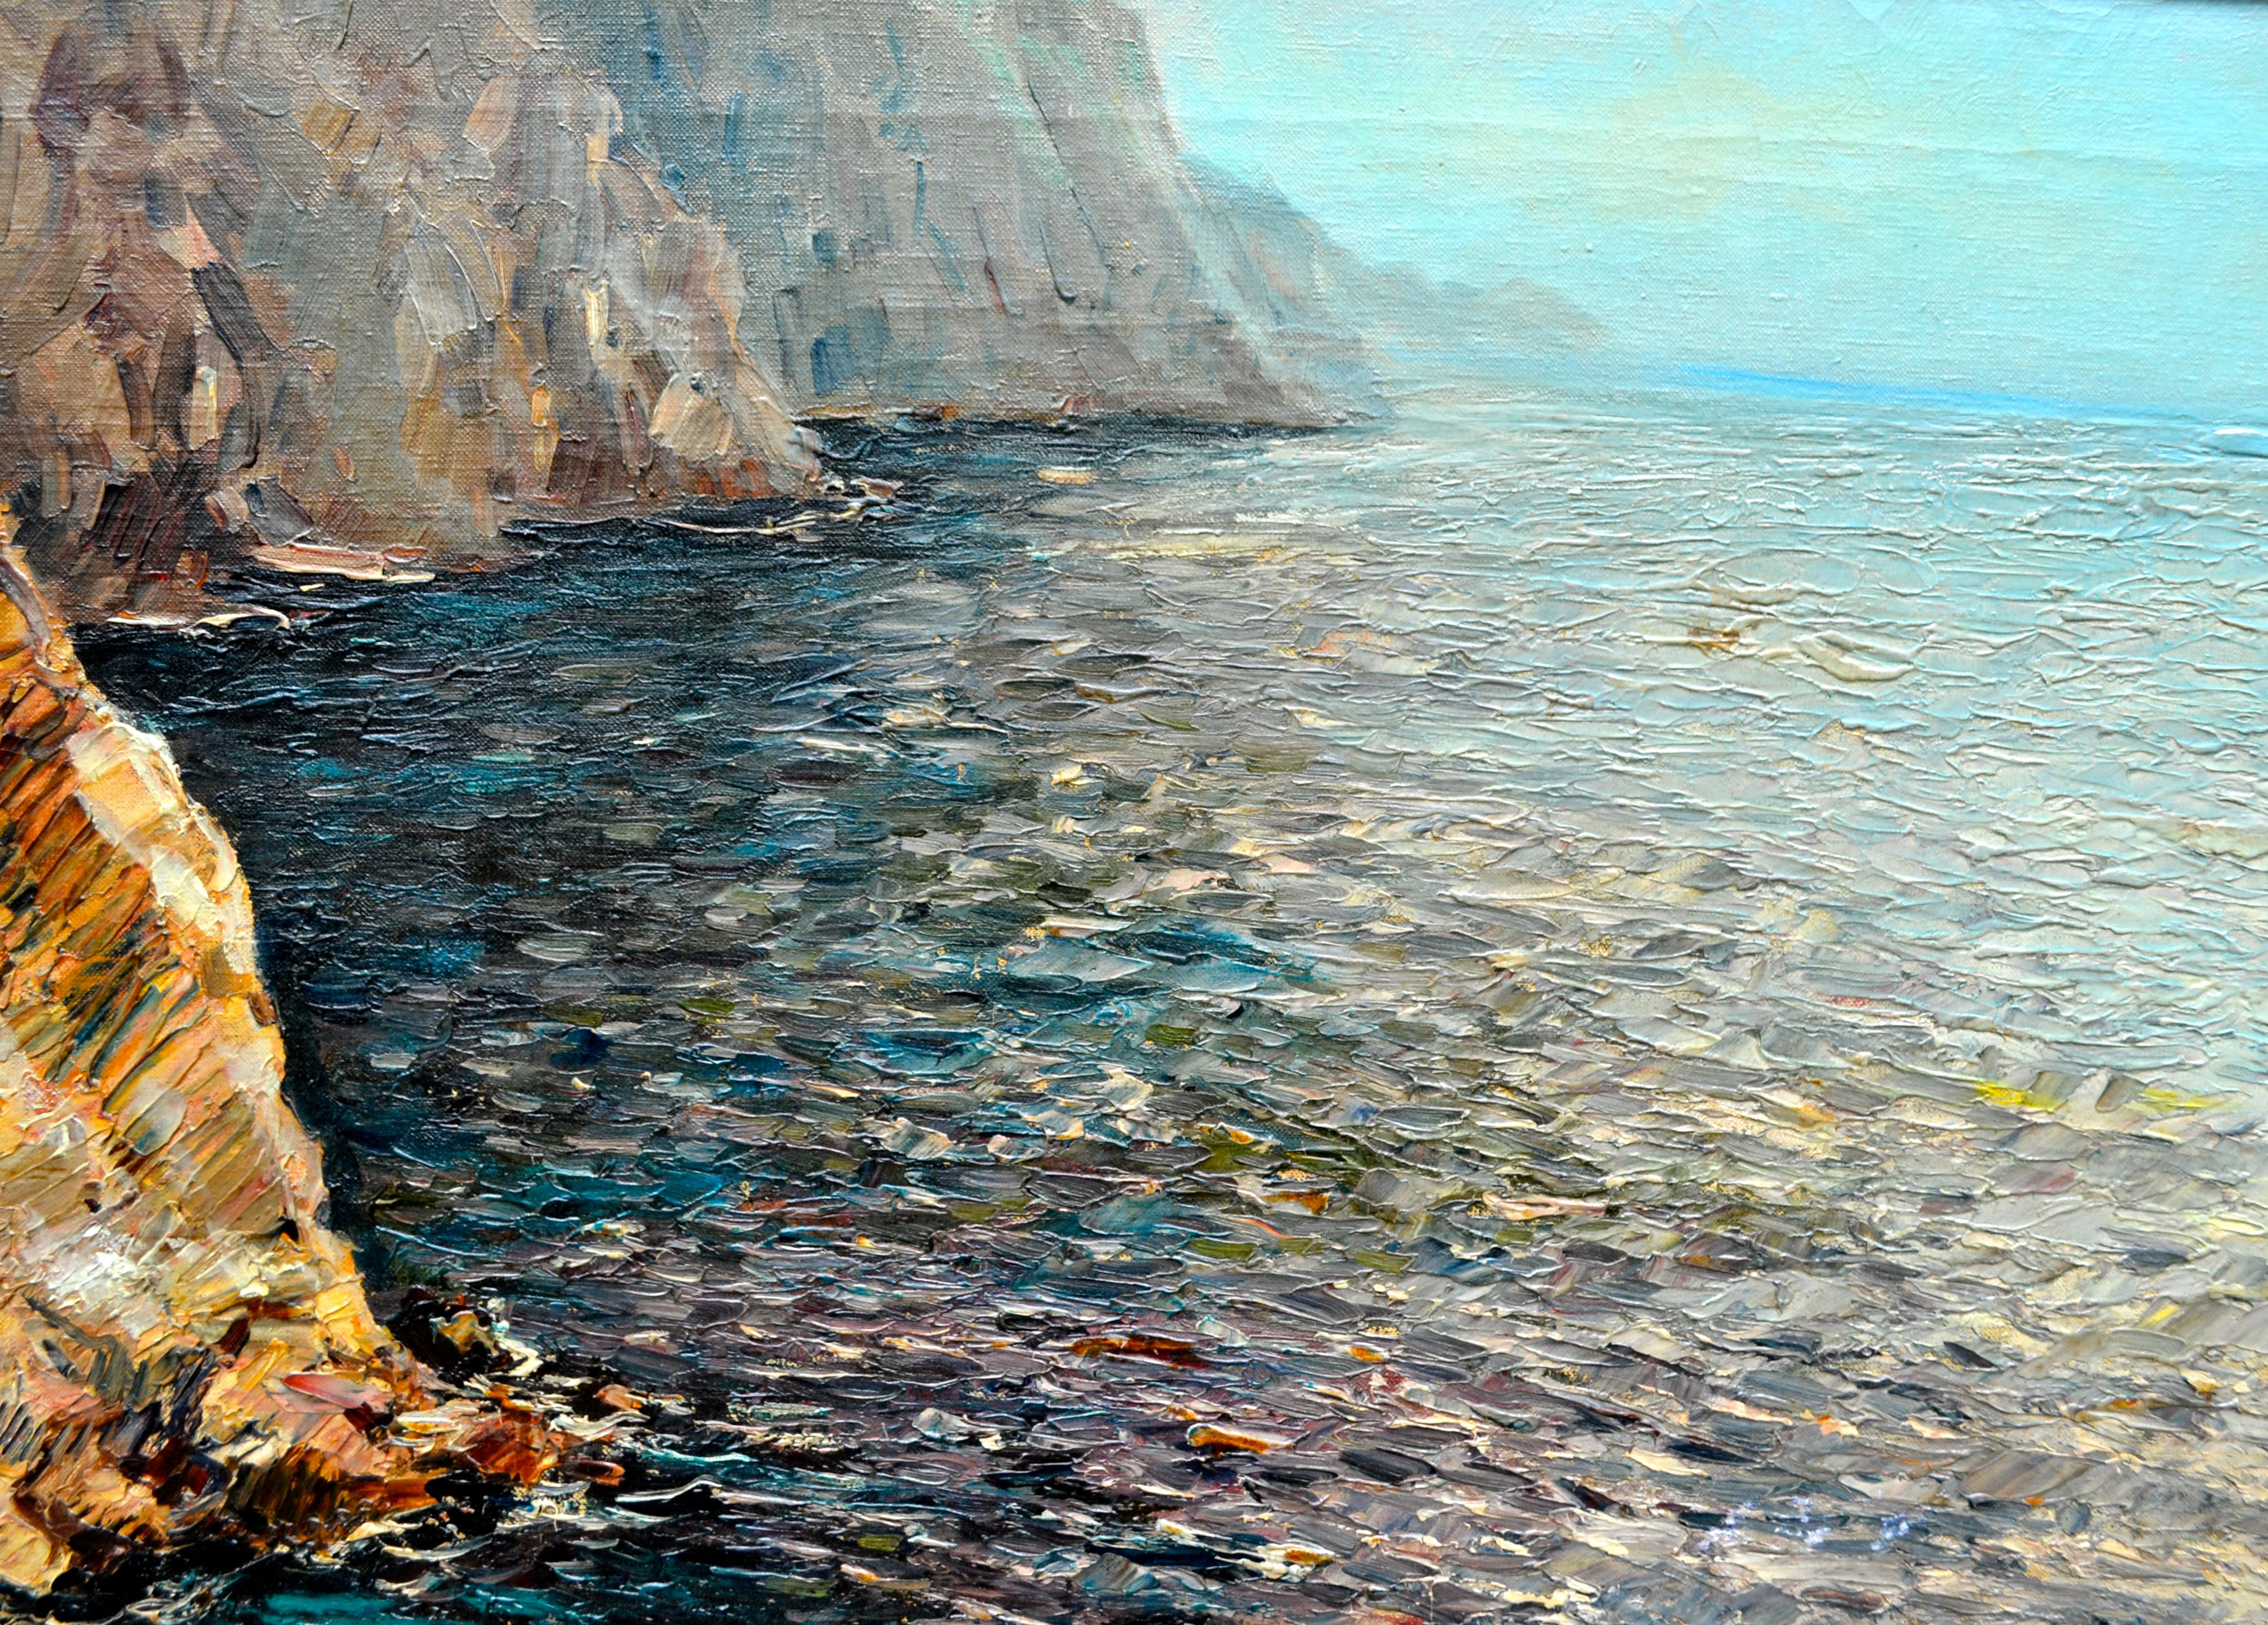 Canvas Oil Painting of the Capri Coastline by Matteo Sarno For Sale